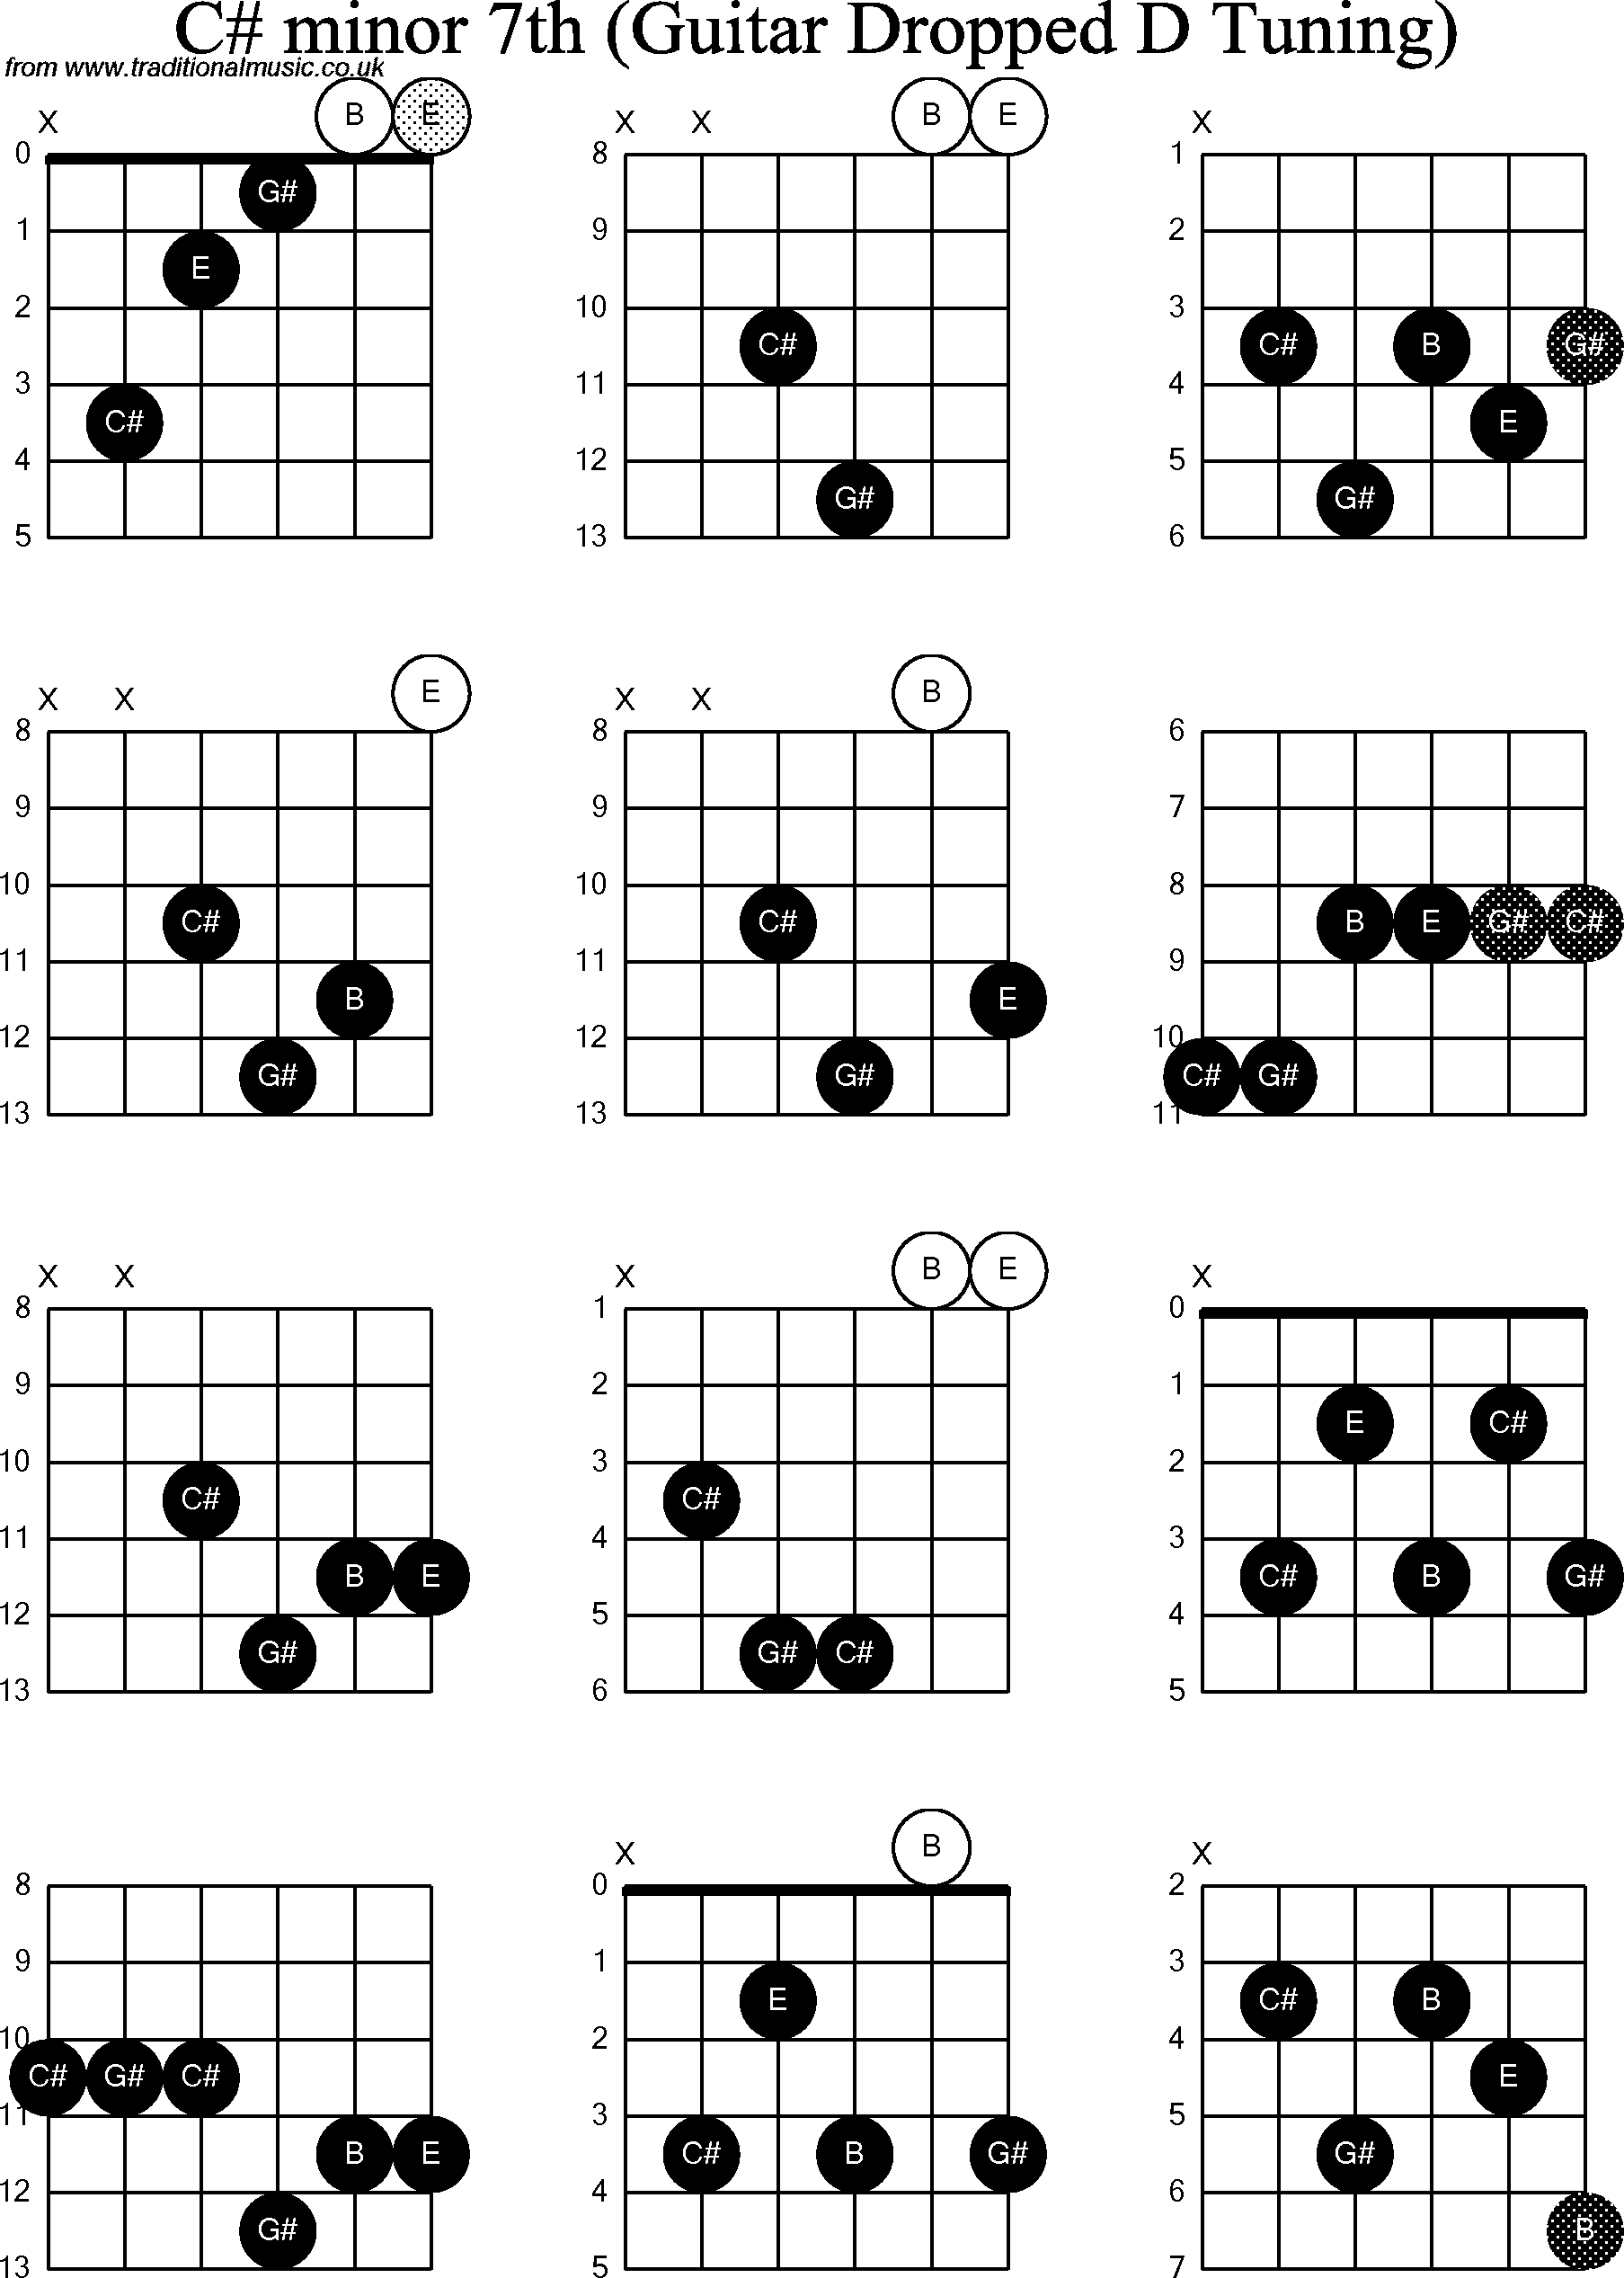 Chord diagrams for dropped D Guitar(DADGBE), C Sharp Minor7th